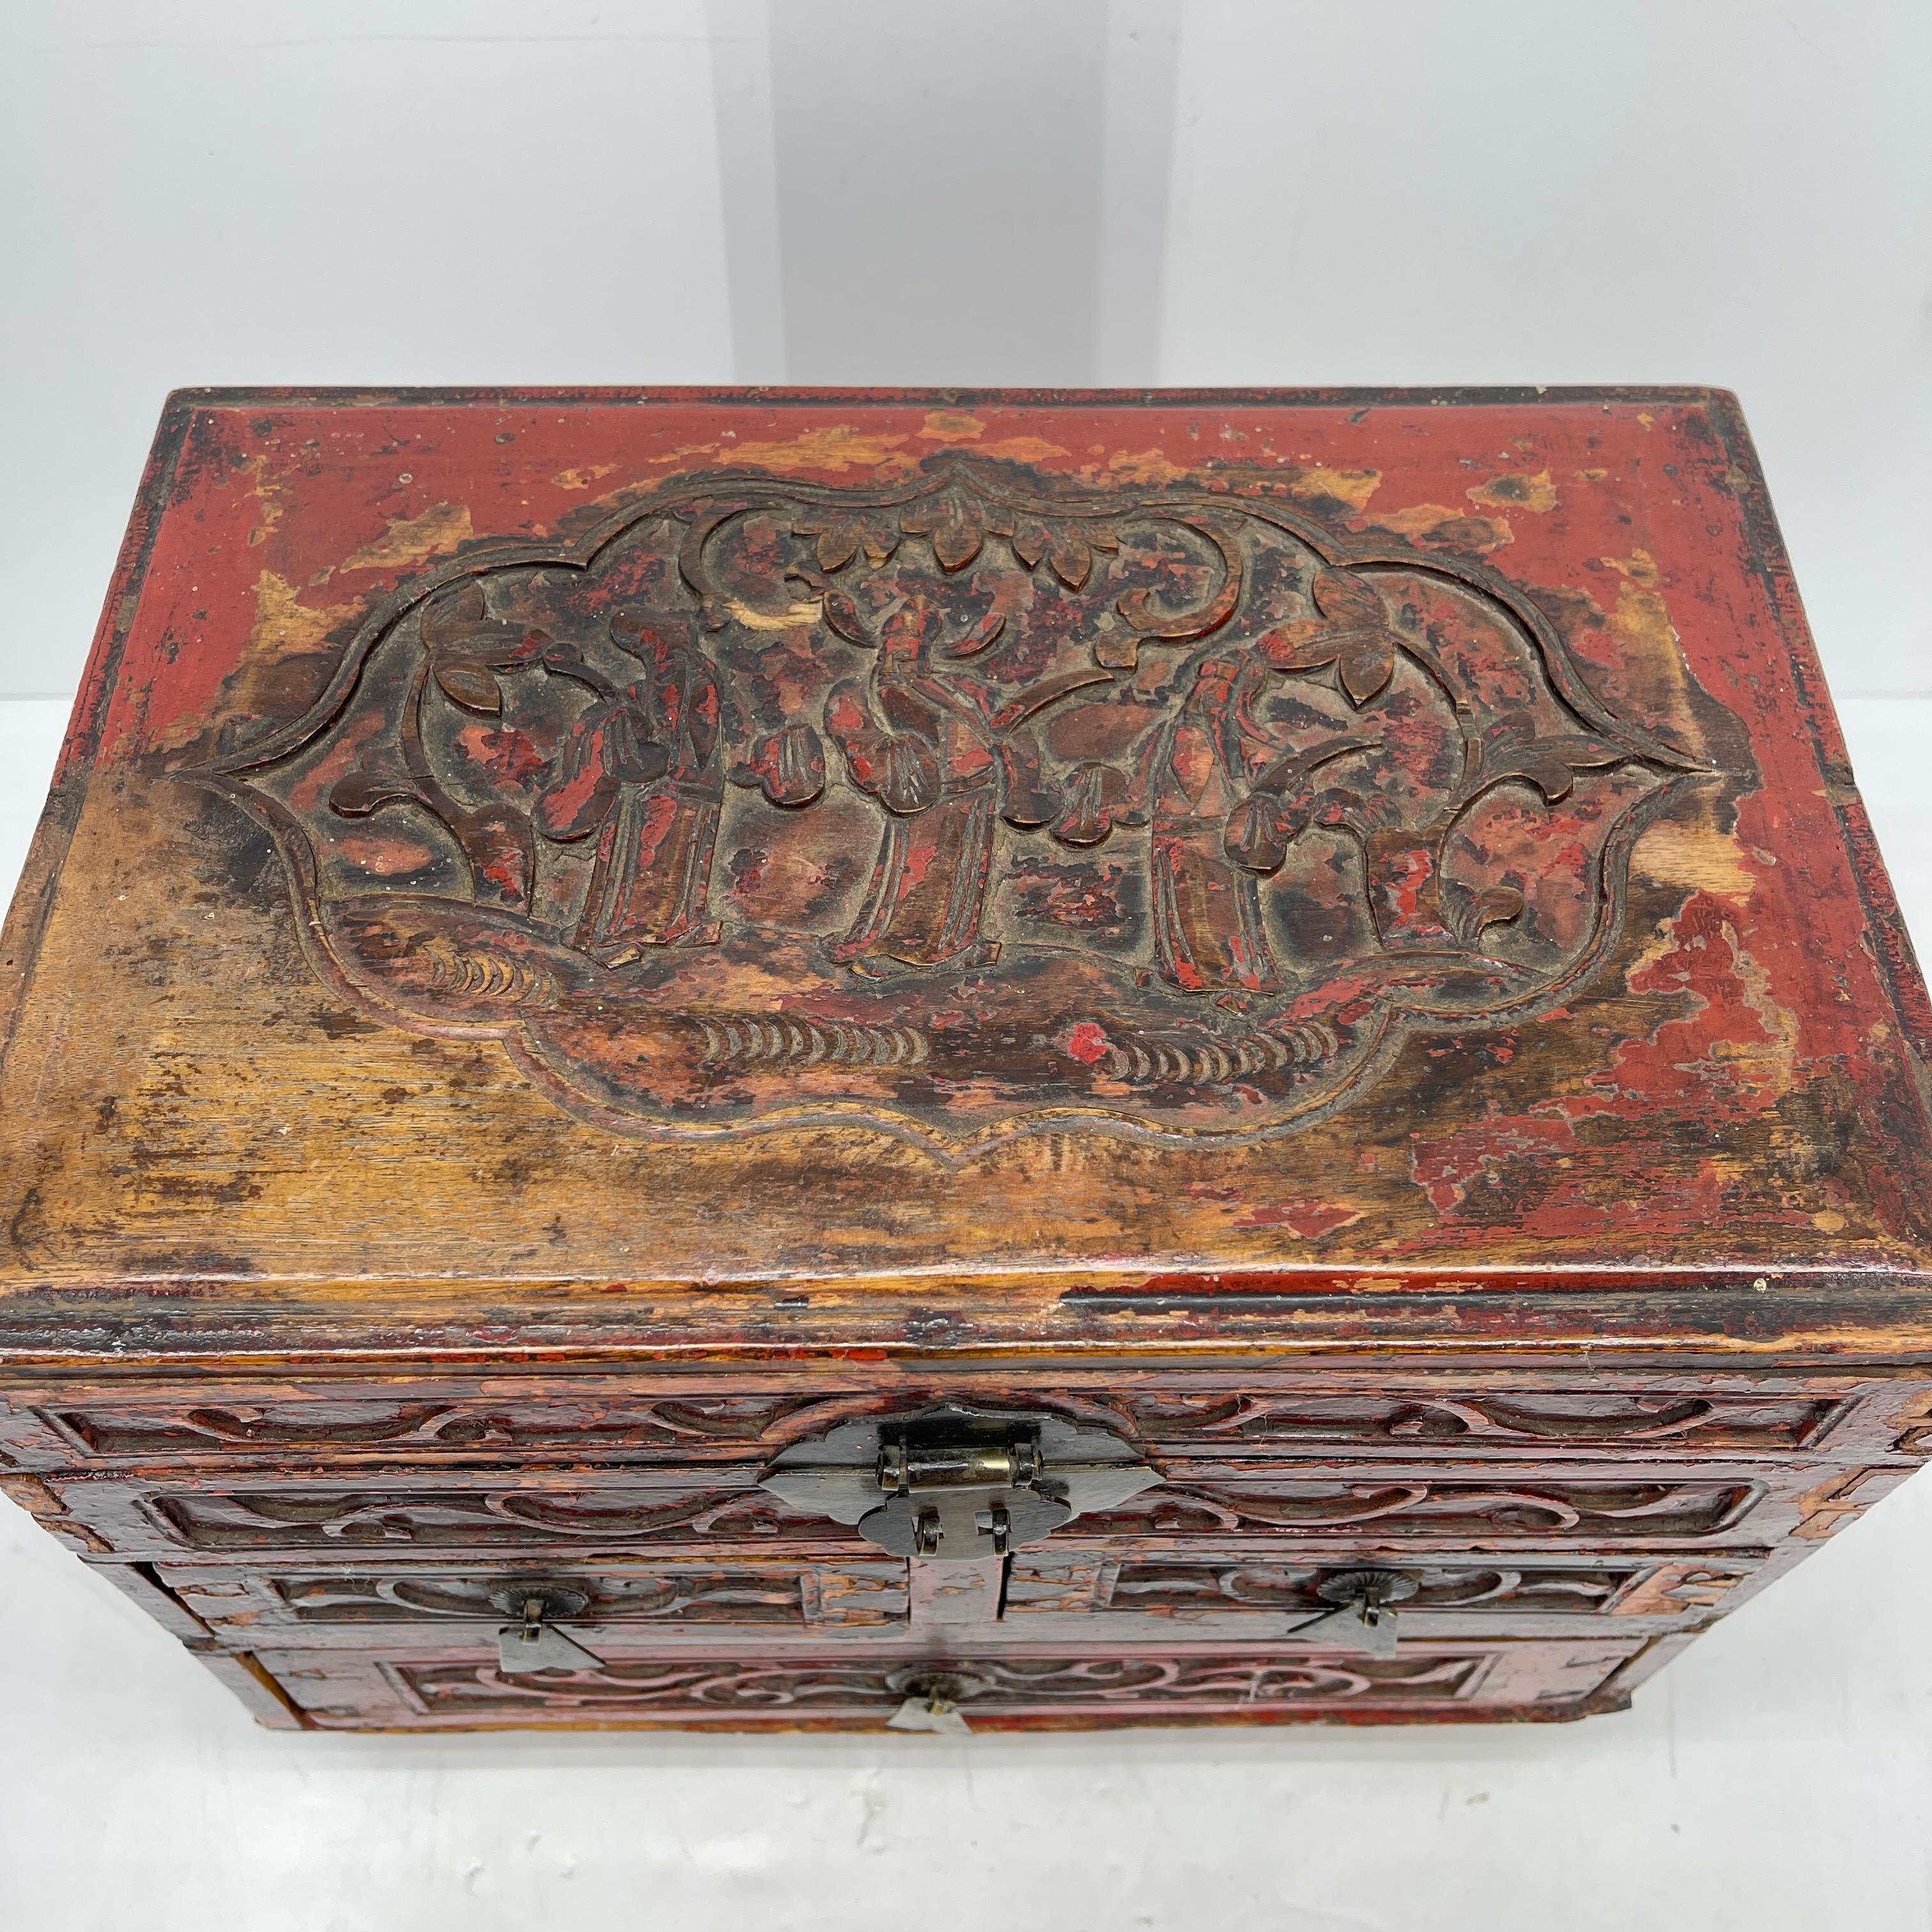 Chinese Export Antique Chinese Carved Red Lacquer Jewelry Collectibles Box